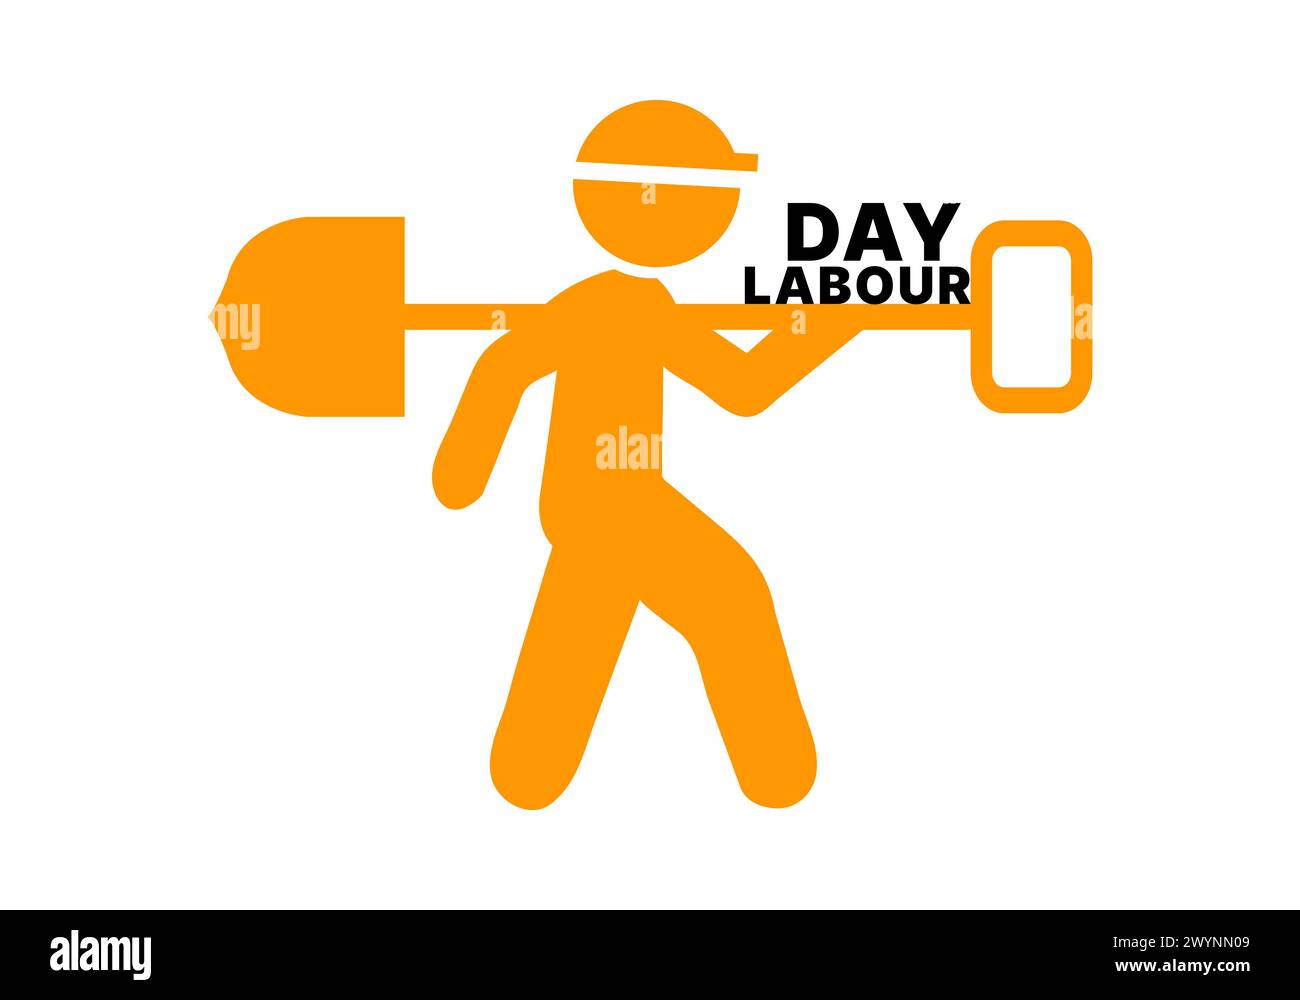 International Labor day vector illustration design for celebrating day of labor in a person character shape with equipment shovel on his shoulder Stock Vector